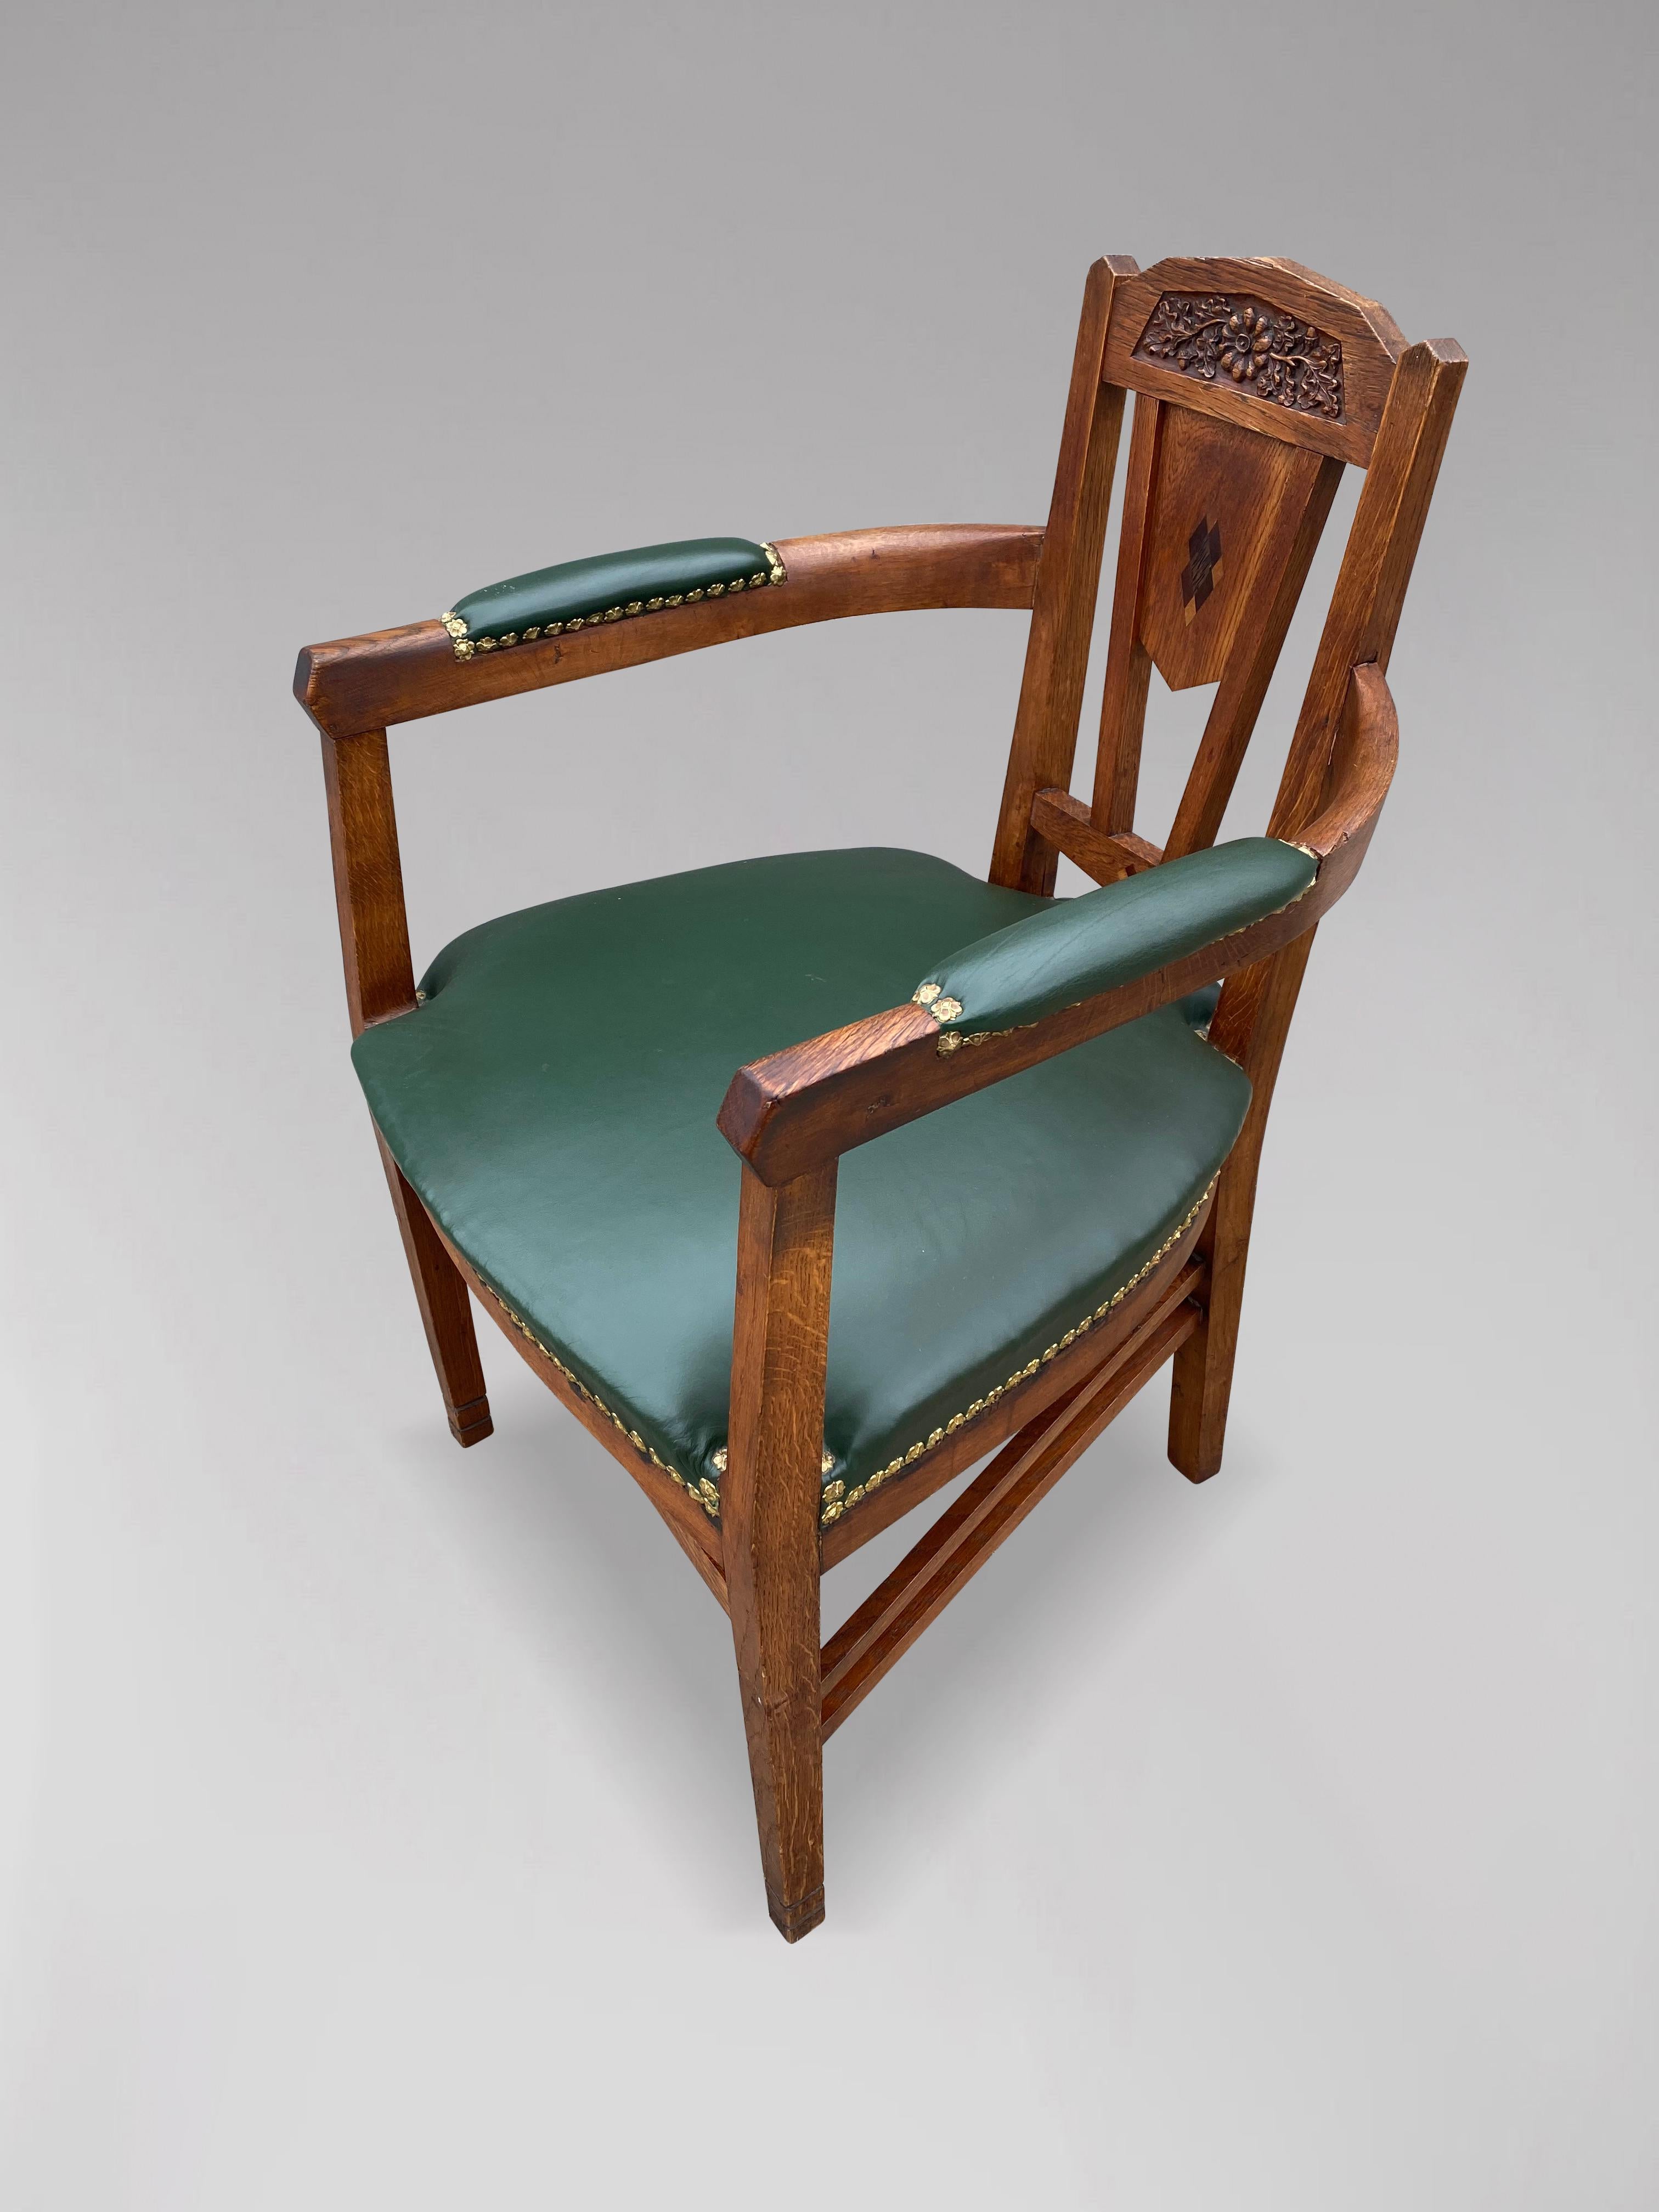 Hand-Crafted Arts & Crafts Art Nouveau Oak Armchair in the Style of Gustave Serrurier Bovy